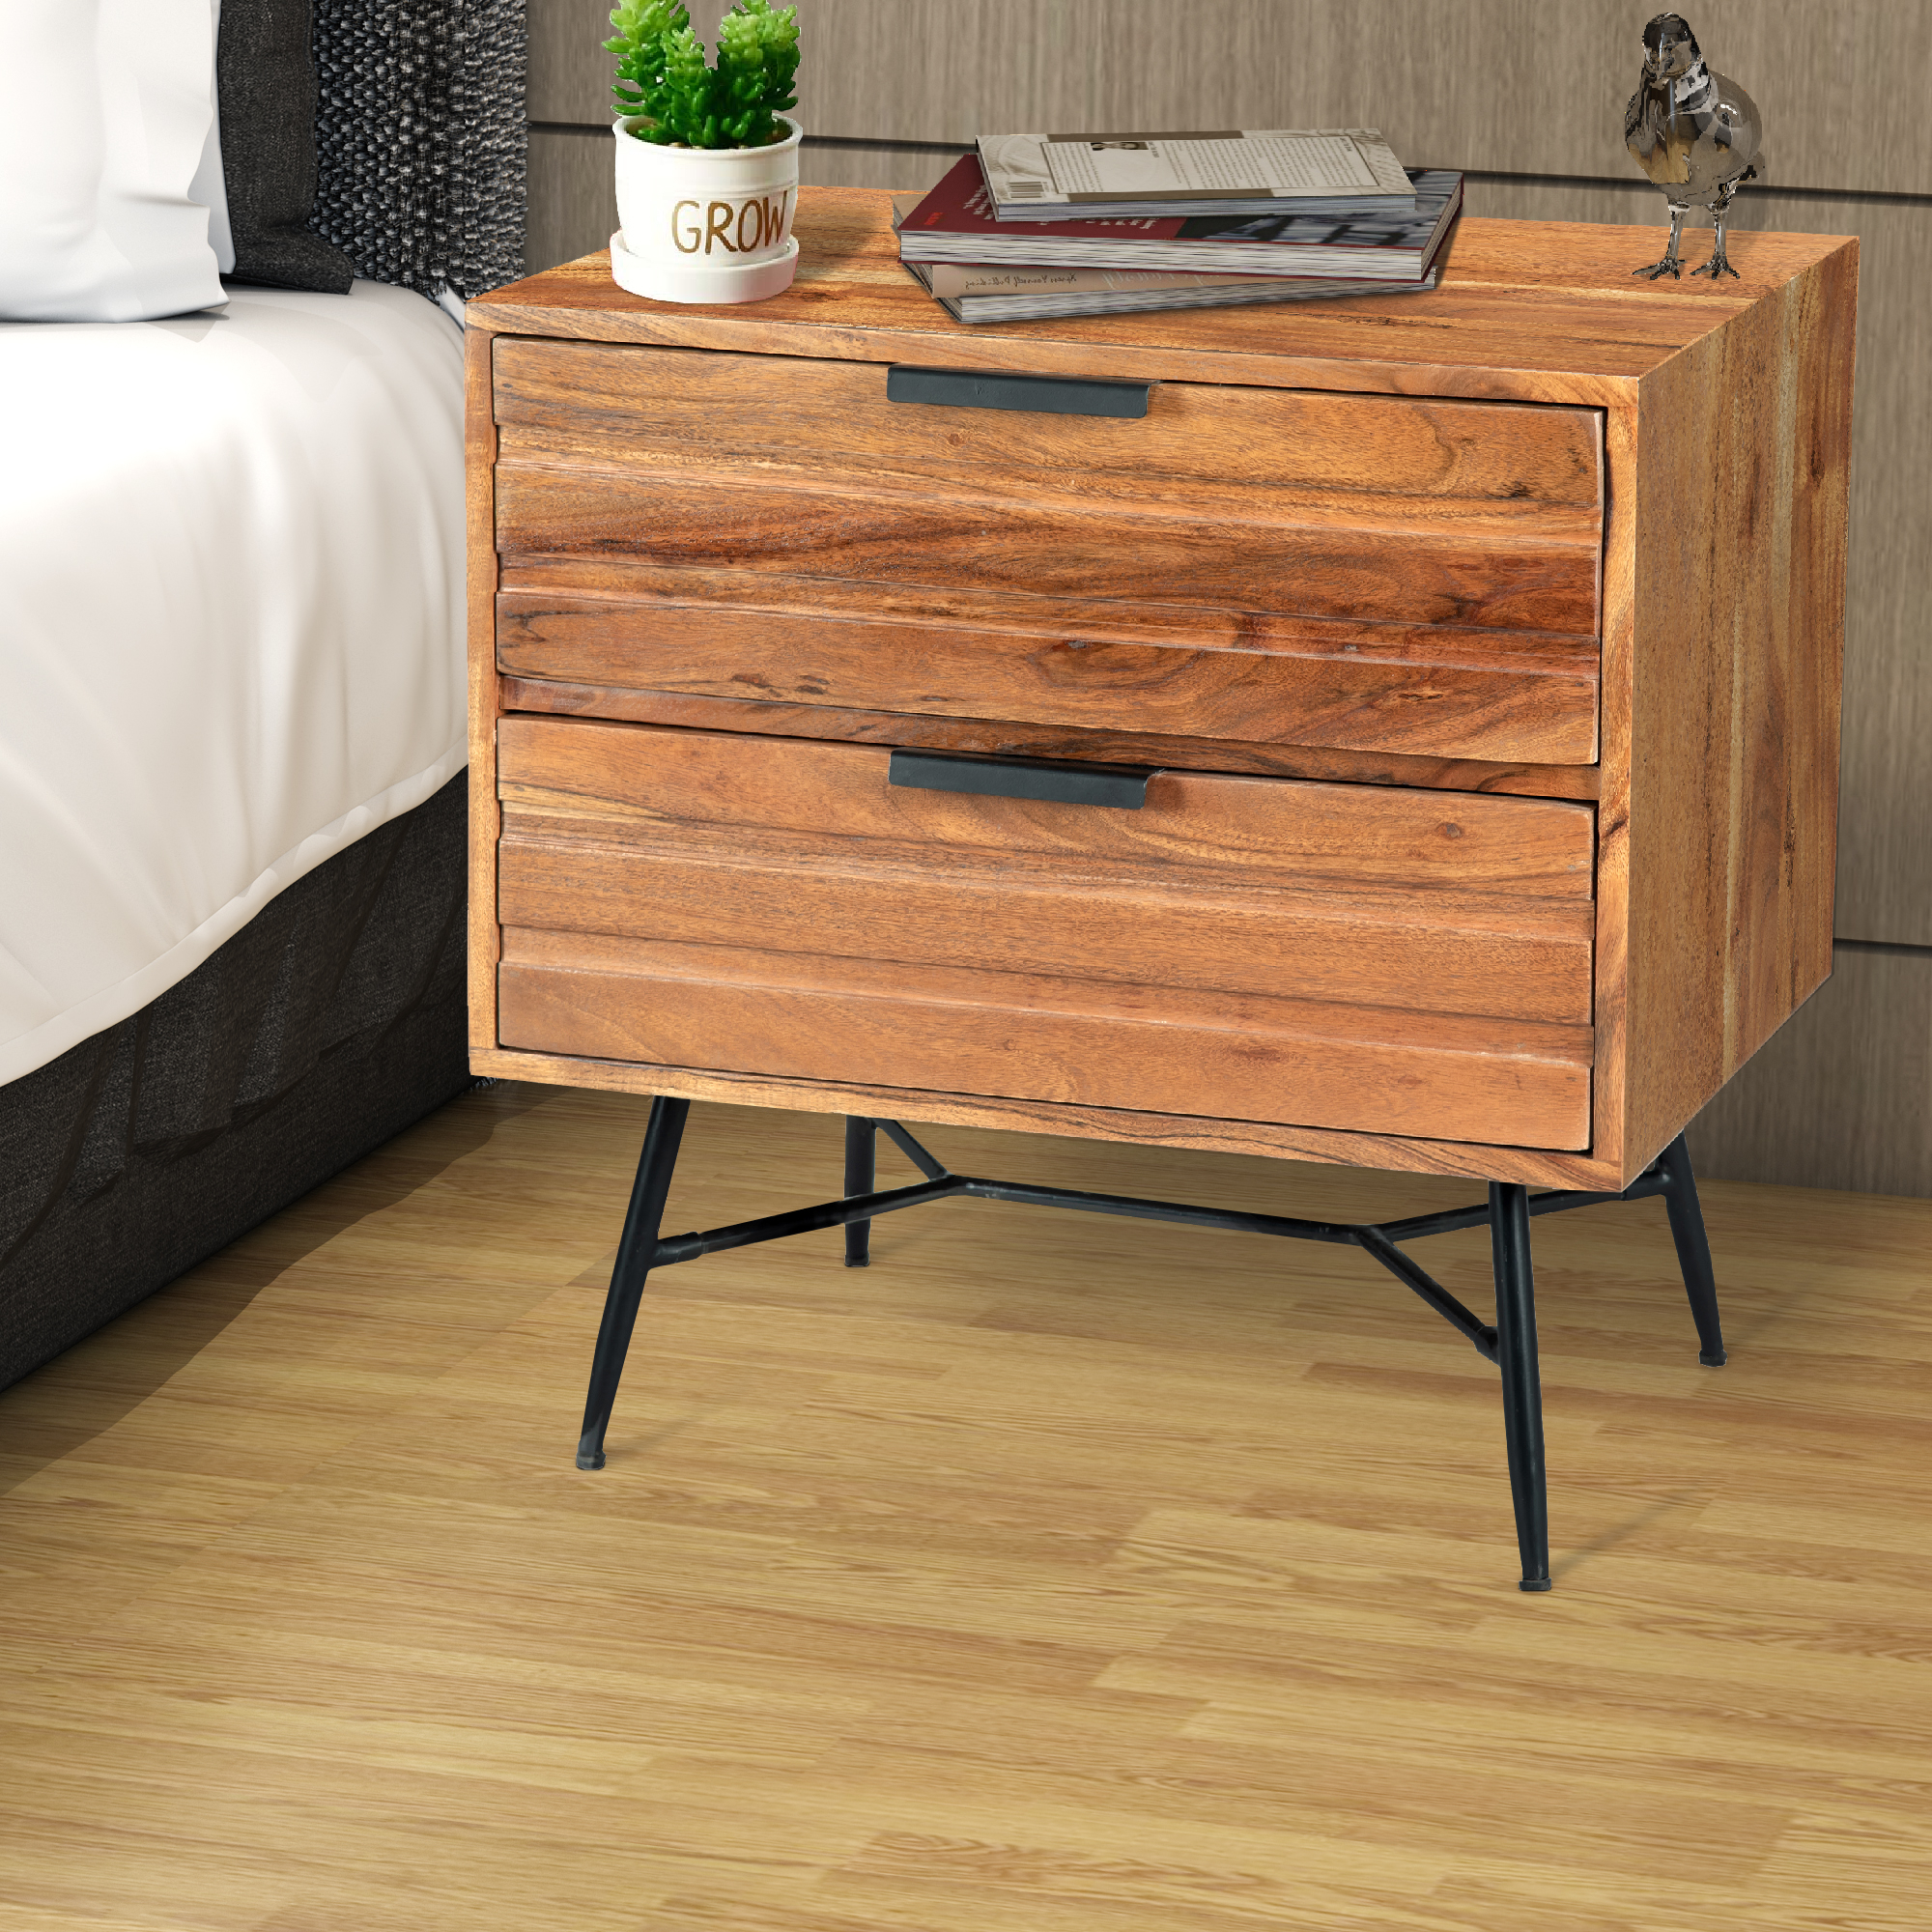 2 Drawer Wooden Nightstand With Metal Angled Legs, Black And Brown- Saltoro Sherpi